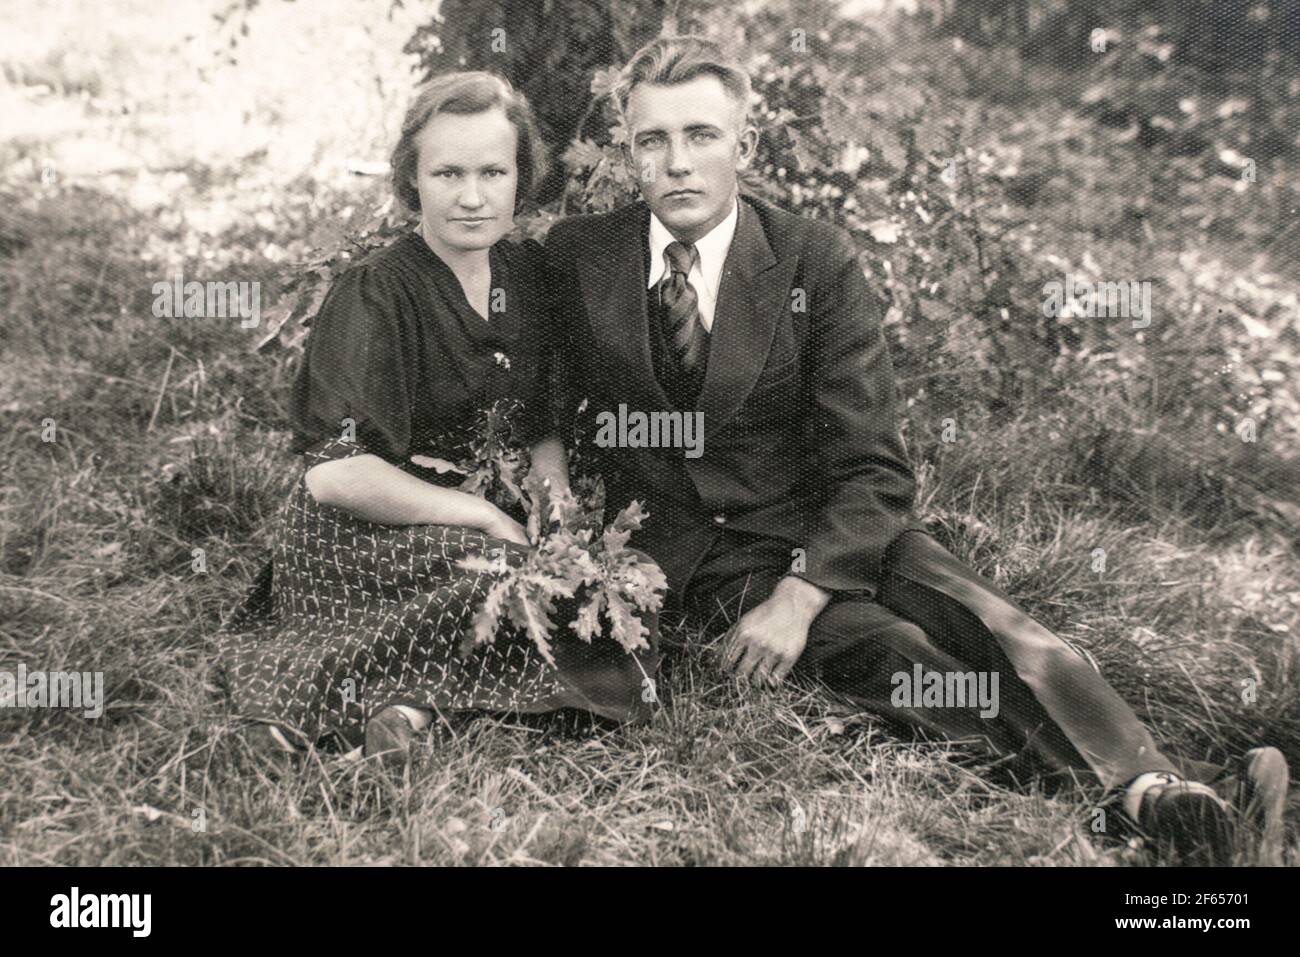 Germany - CIRCA 1930s: Man and woman sitting on ground in forest. Vintage archive Art deco era photo Stock Photo